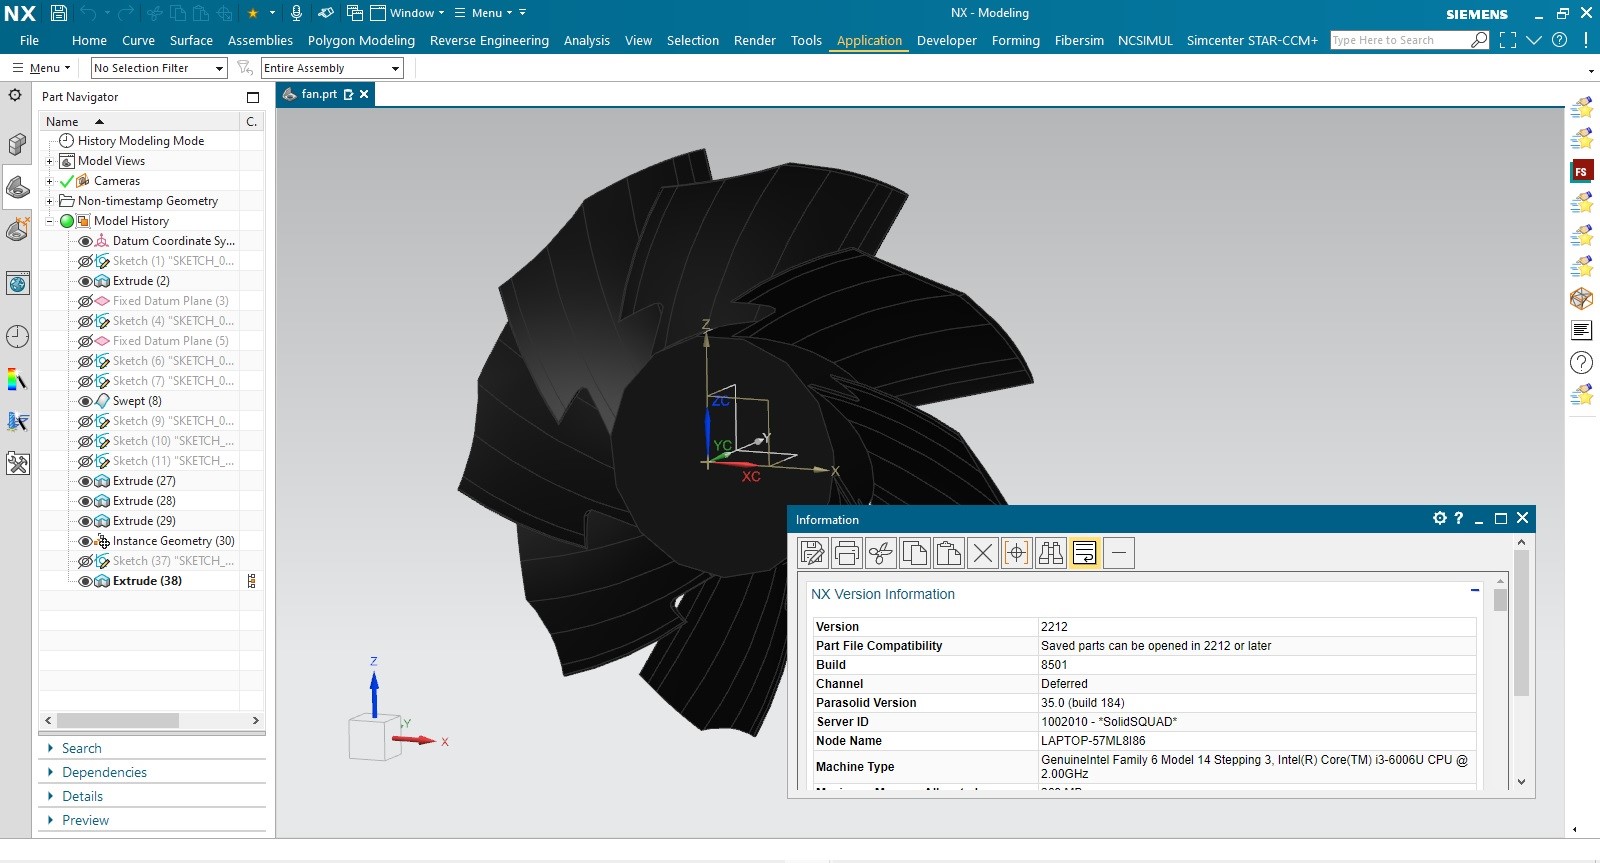 Working with Siemens NX 2212 Build 8501 (NX 2212 Series) full license